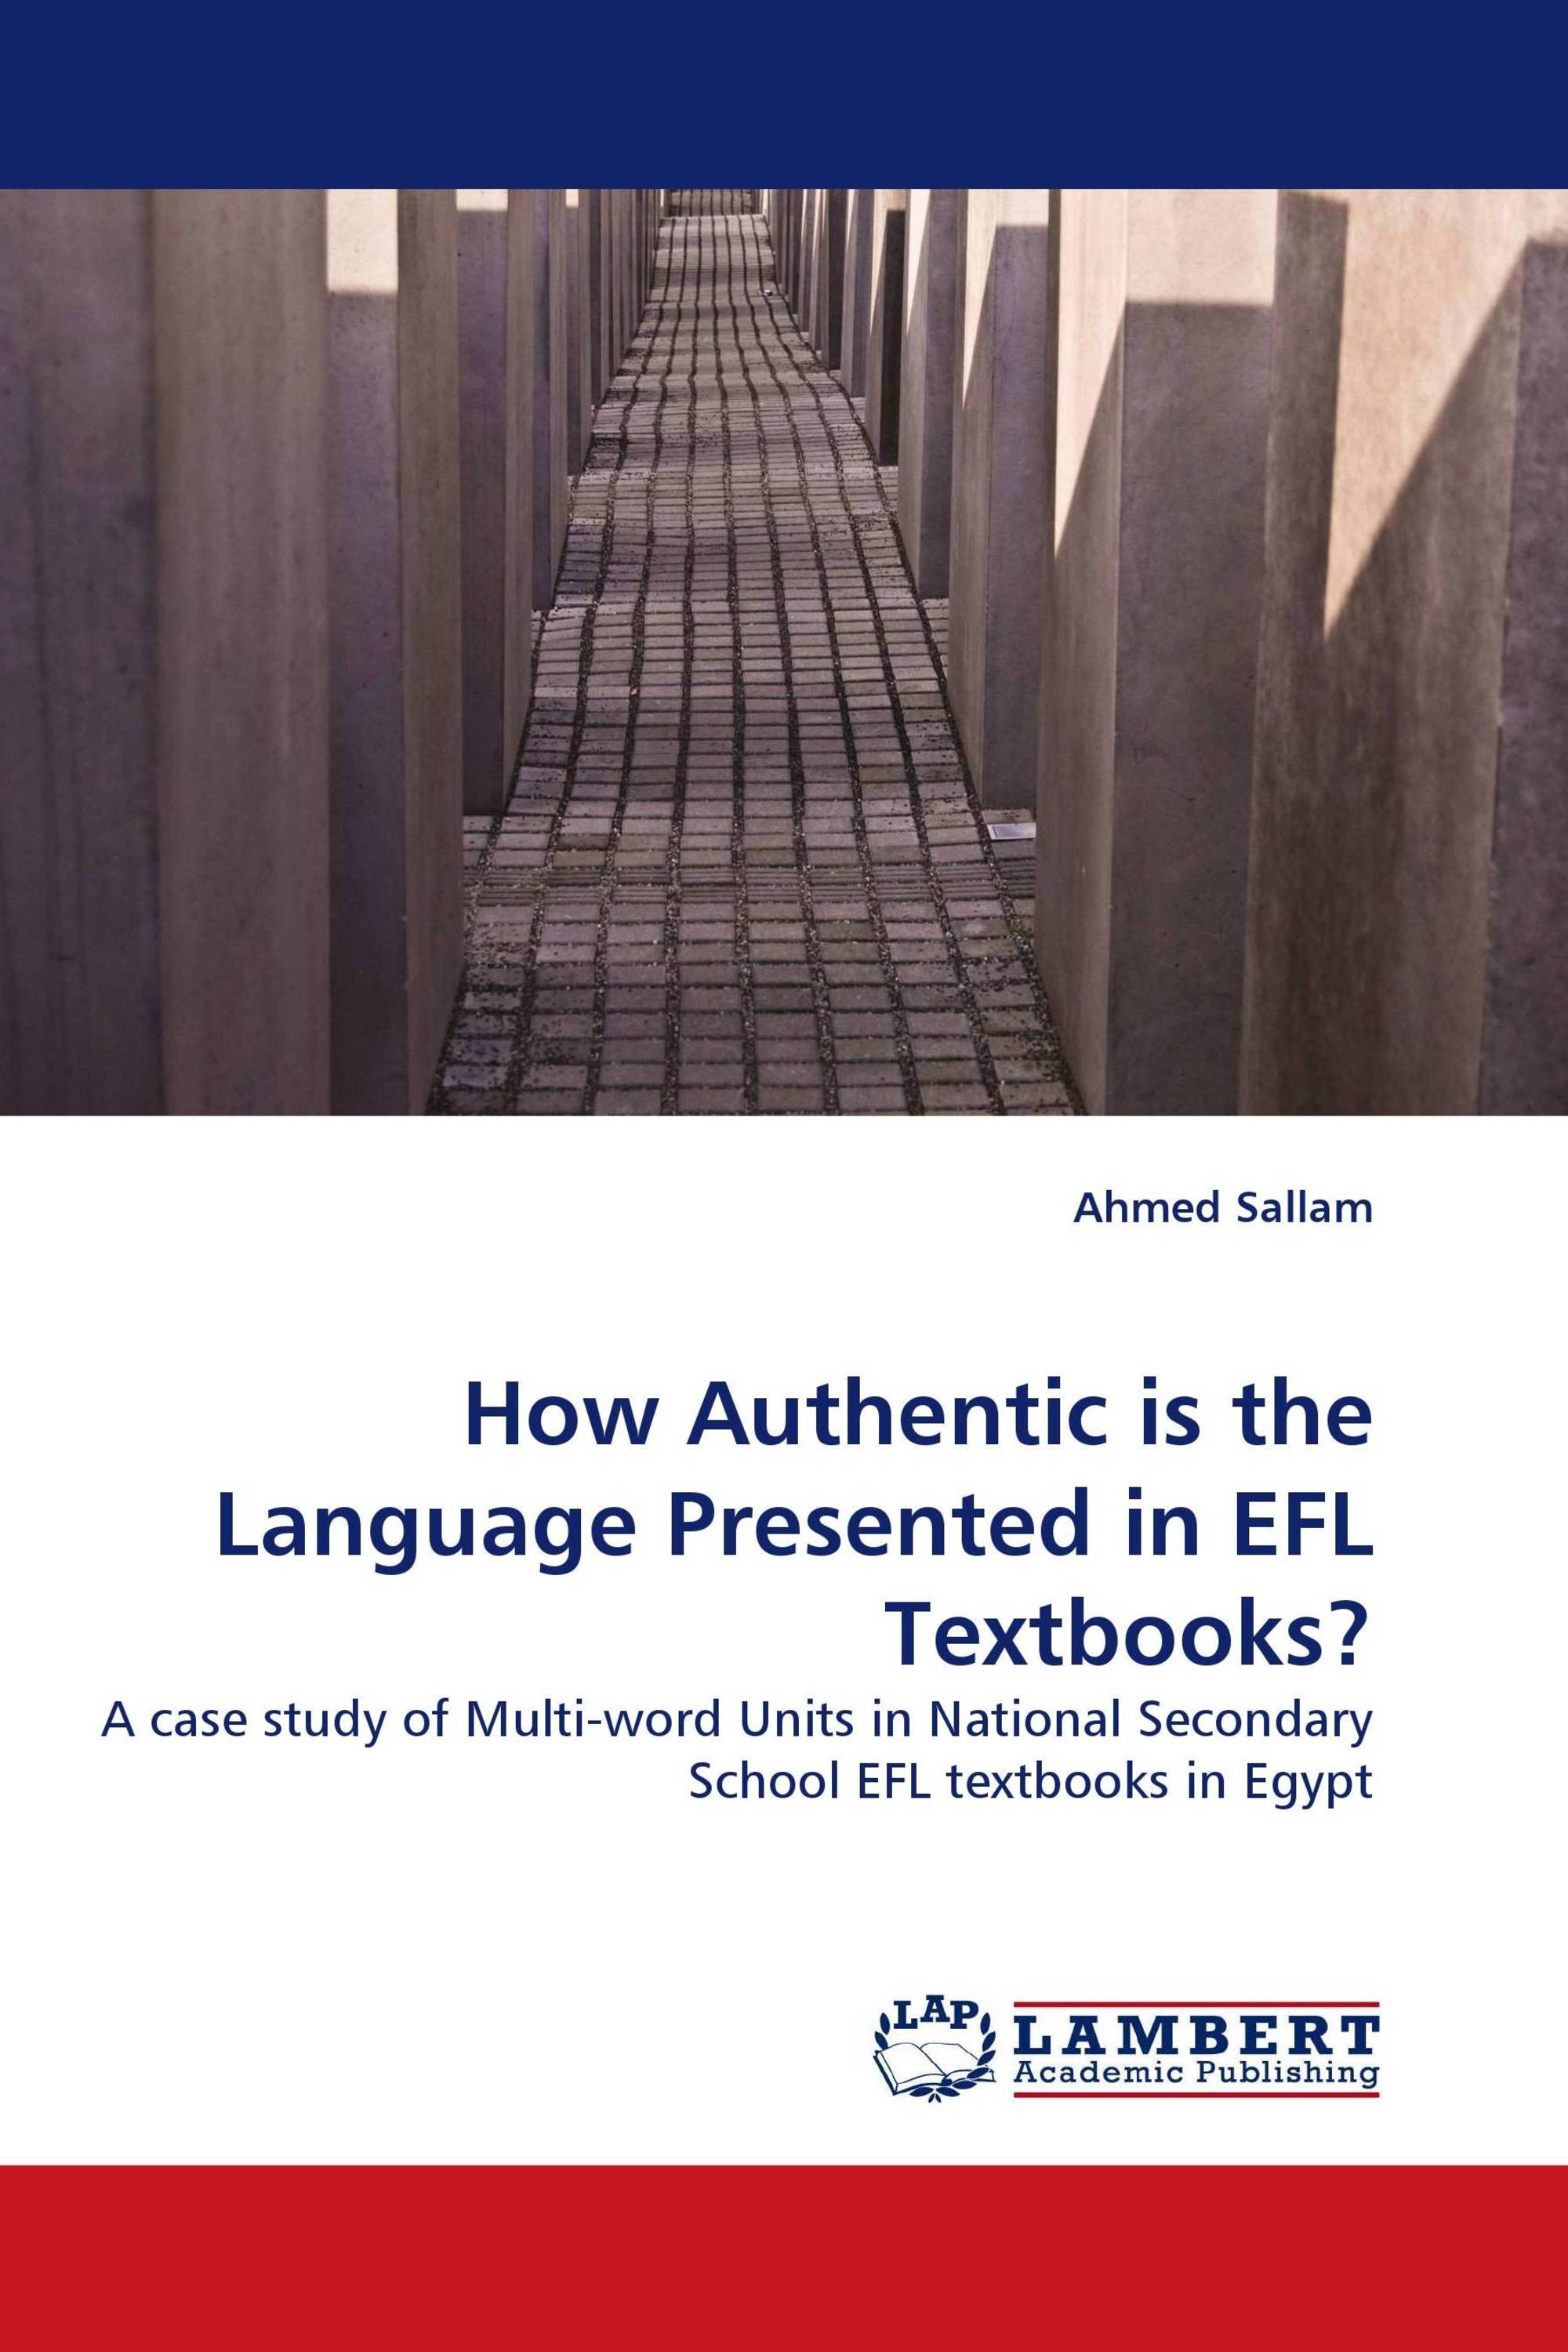 How Authentic is the Language Presented in EFL Textbooks?